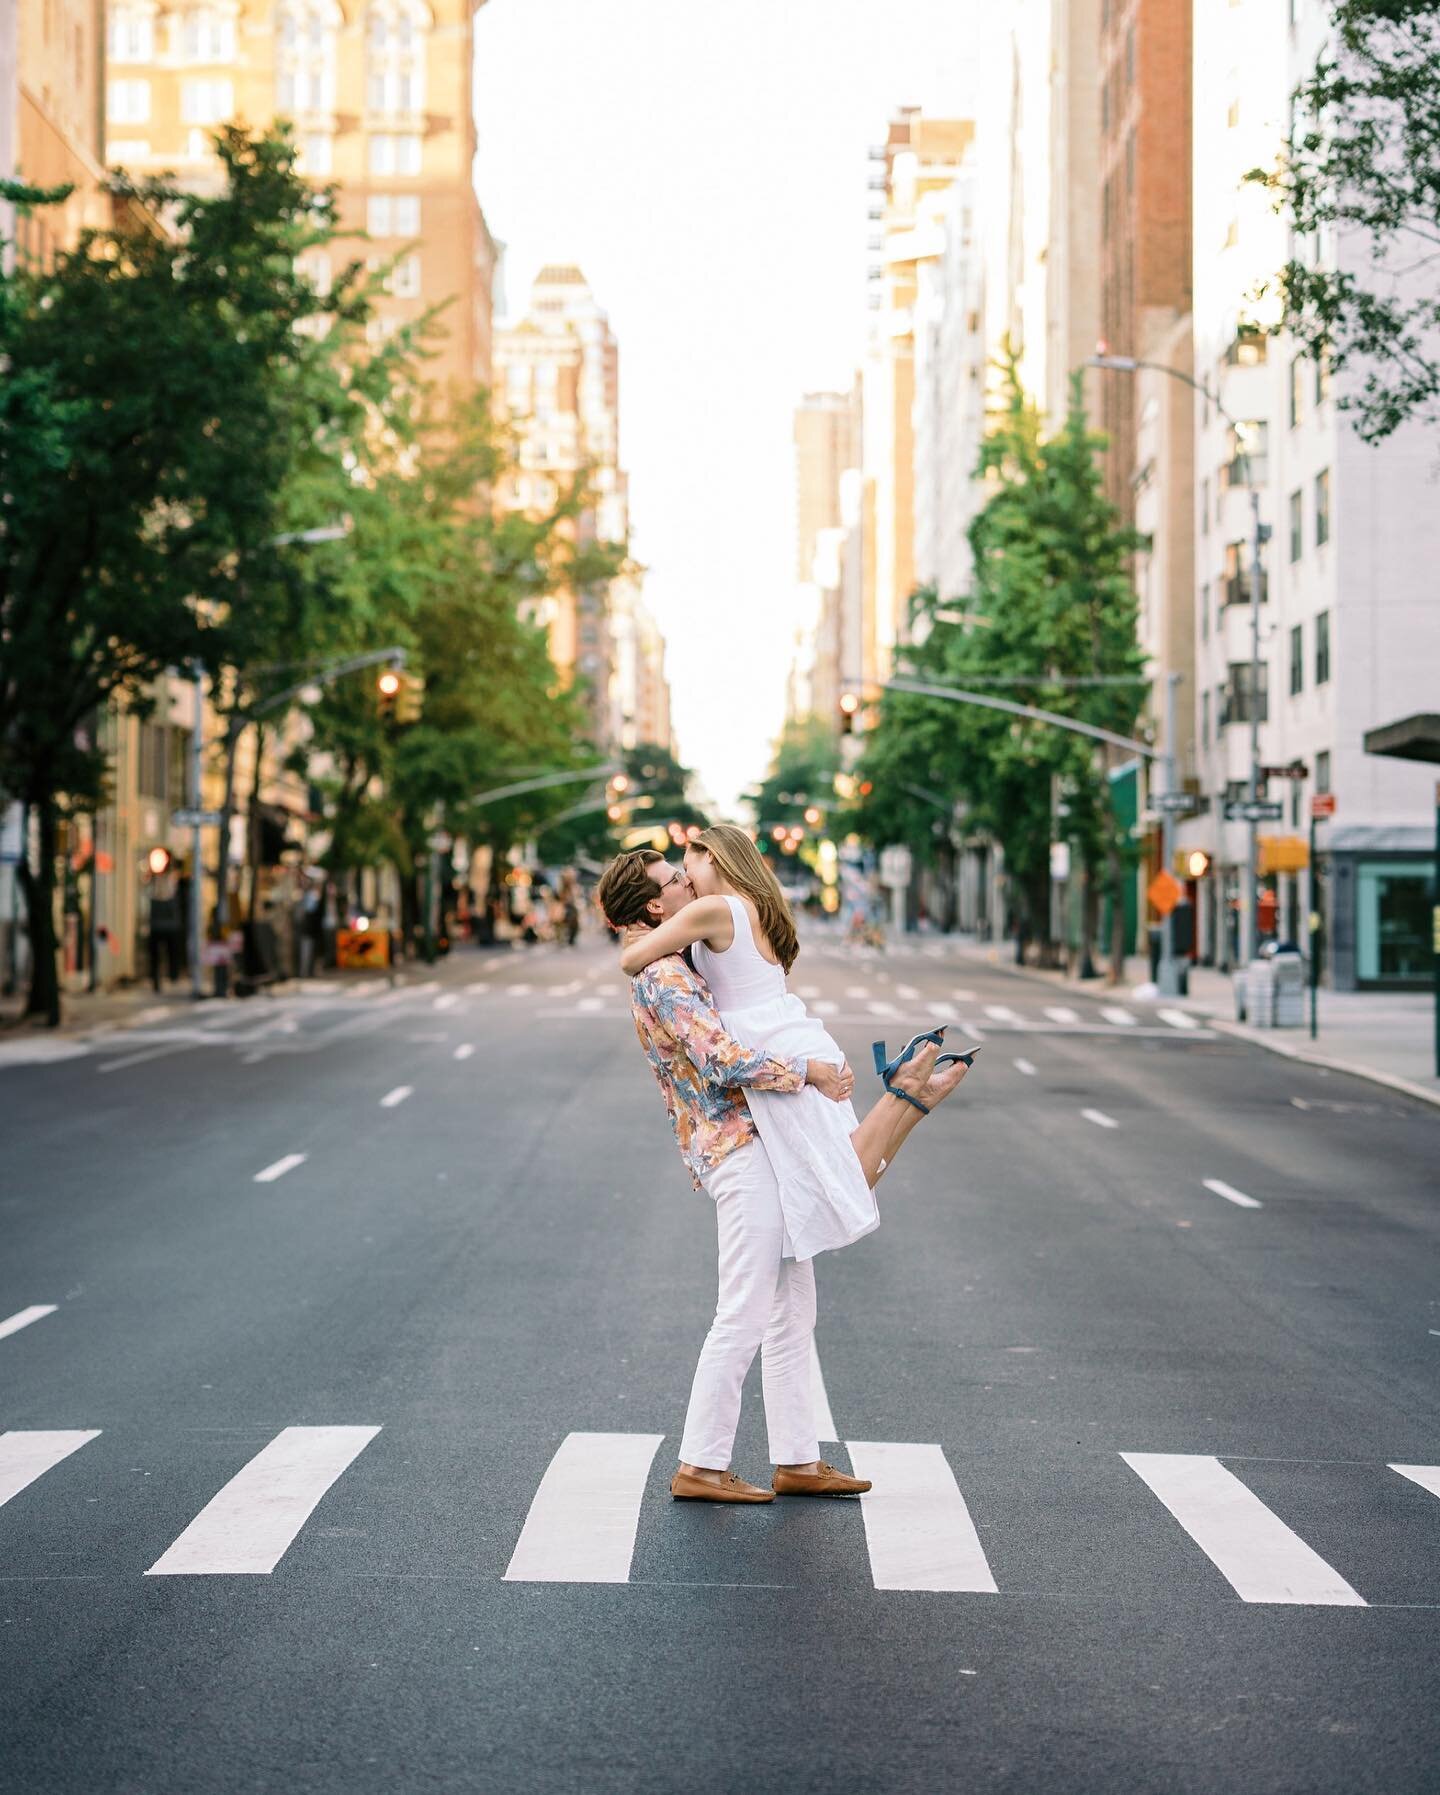 Had some fun running around NYC with the newly engaged couple 🍾💍🌆 @hannaheareckson @petermteague 
.
.
.
.
.
#nycengagement #centralparkengagement #centralparknyc #nycengagementphotographer #njengagement #njengagementphotographer #thearchetypeproce